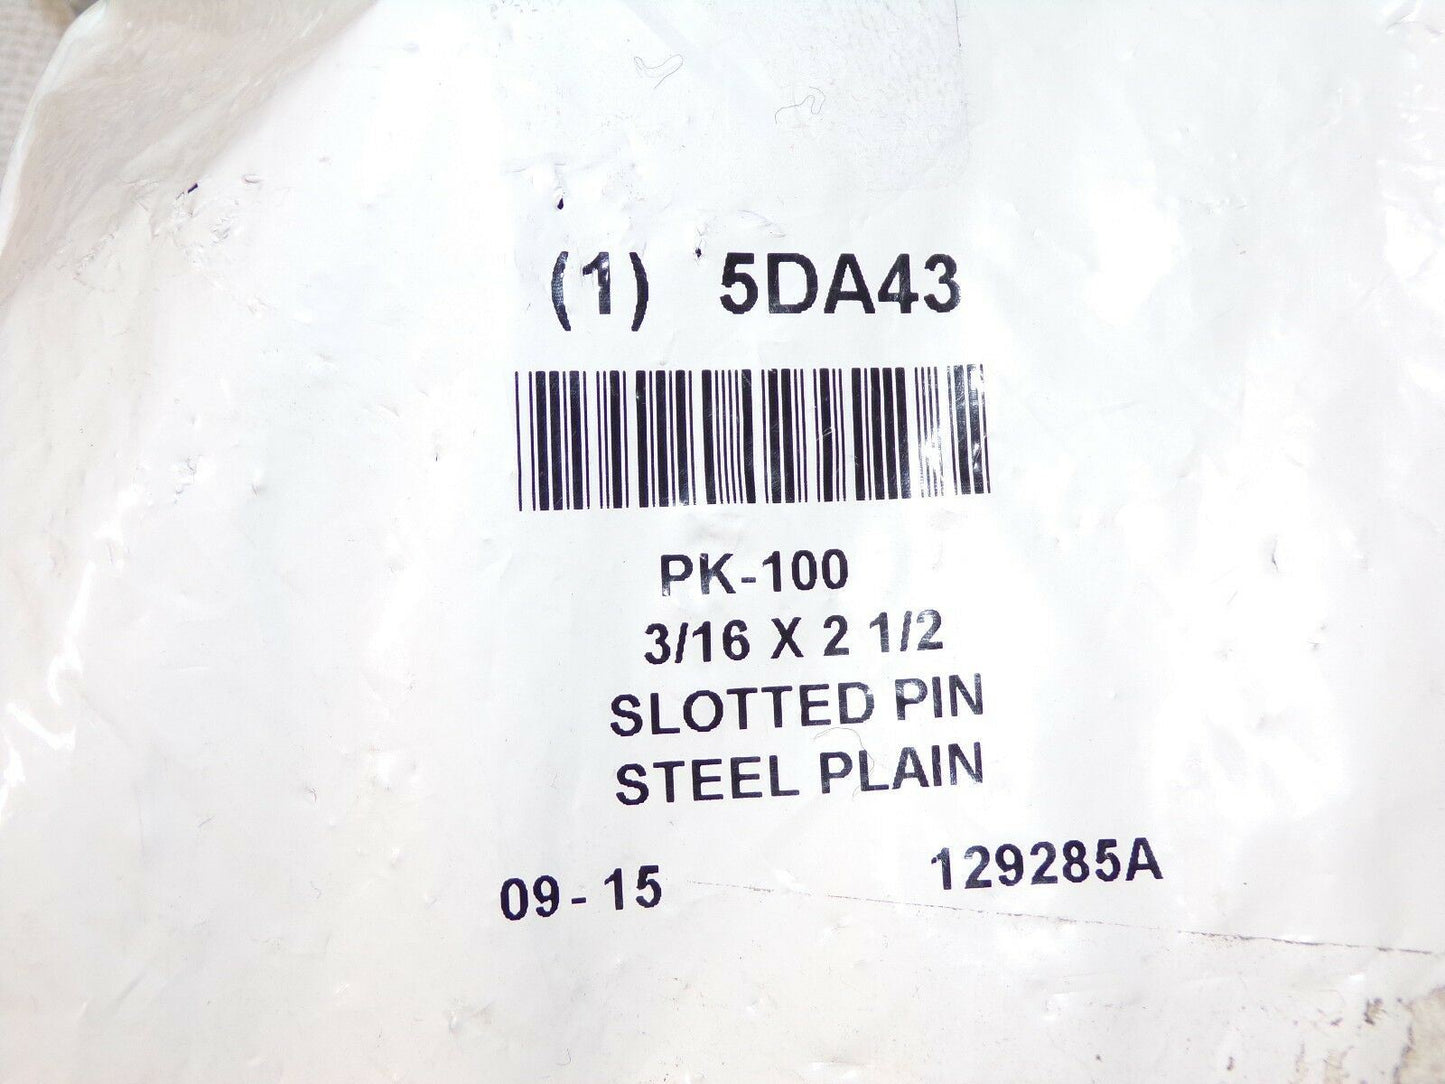 Steel Slotted Spring Pin 2-1/2" Length 3/16" Outside Dia. 5DA43 QTY-100 (183340374254-2F19 (D))